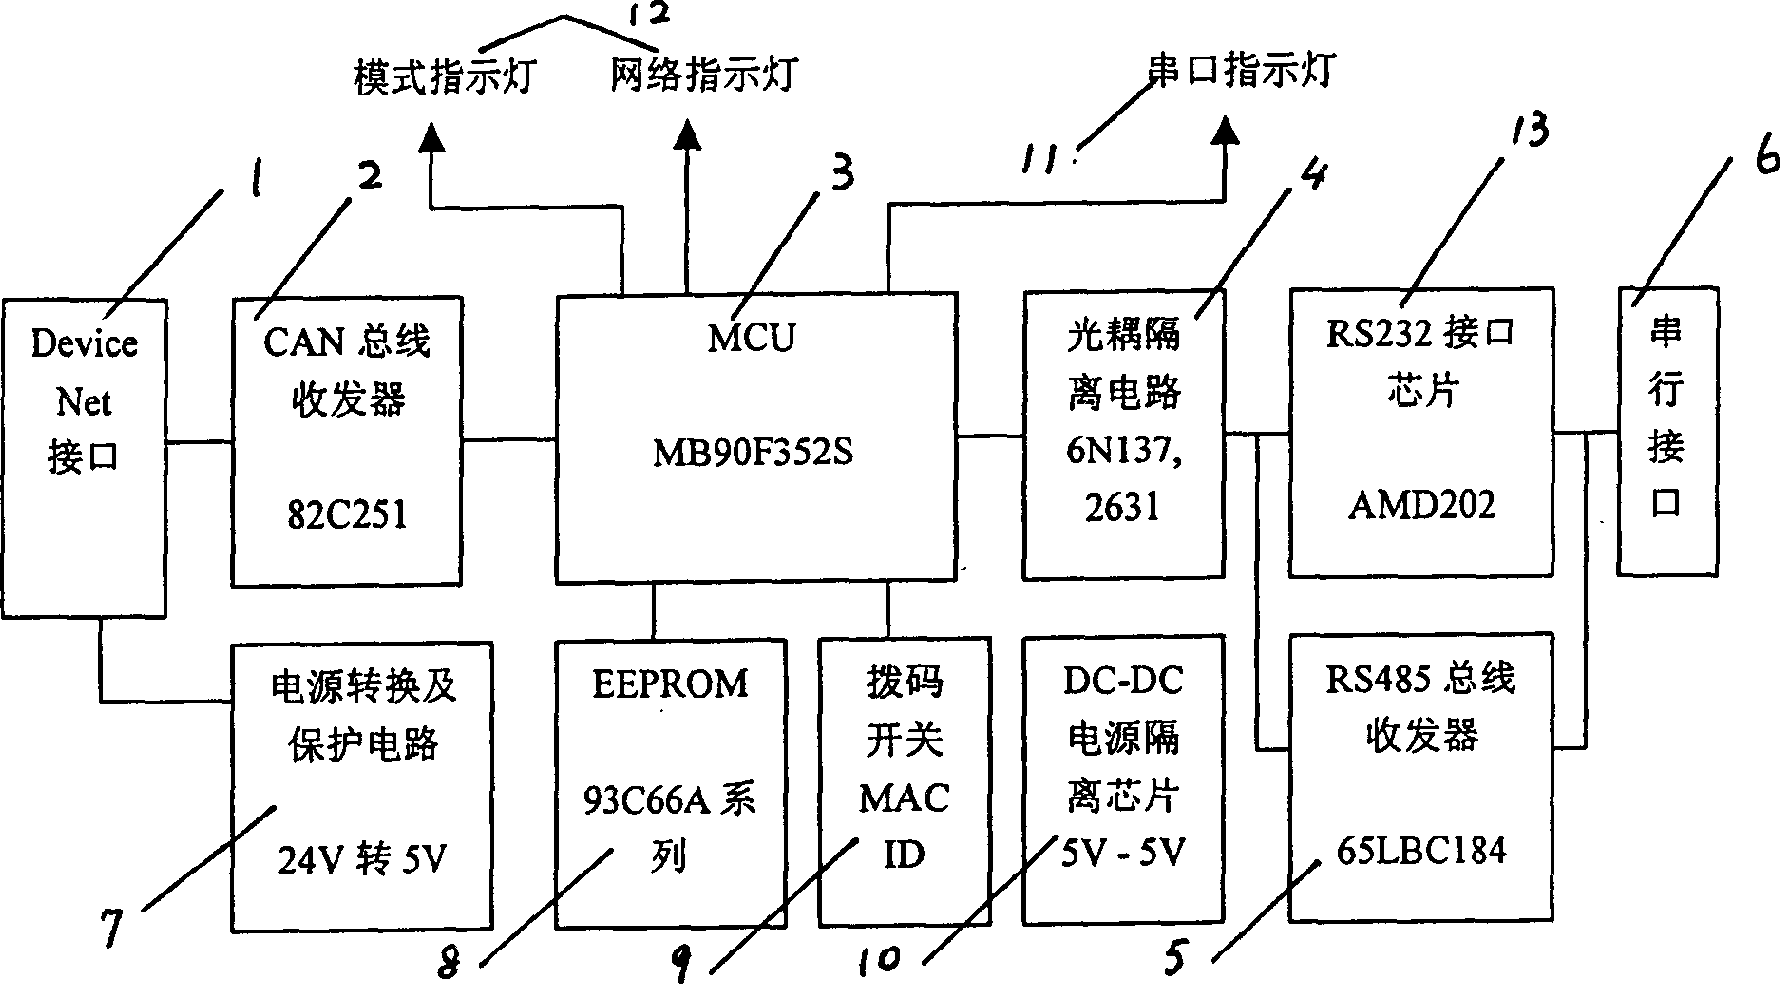 Field bus communication adapter with configurable characteristic